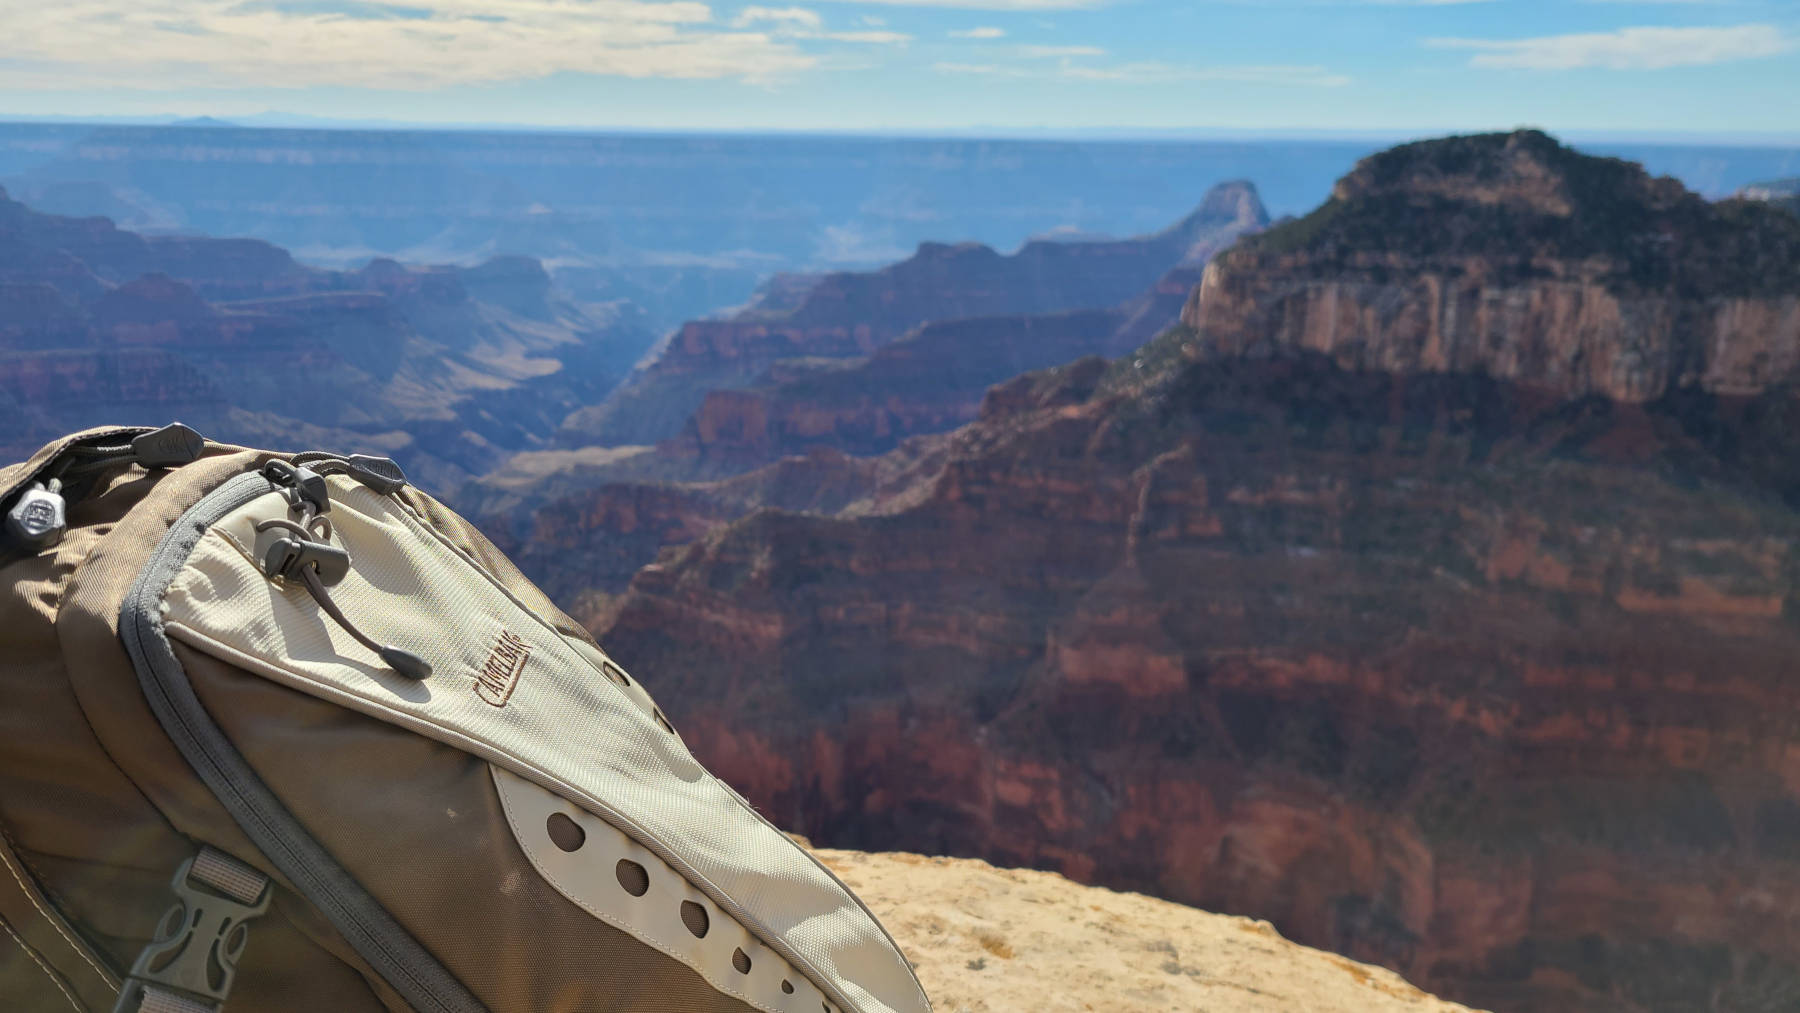 Ashley's Camelbak hydration pack while at the North Rim of the Grand Canyon - Hello Trail